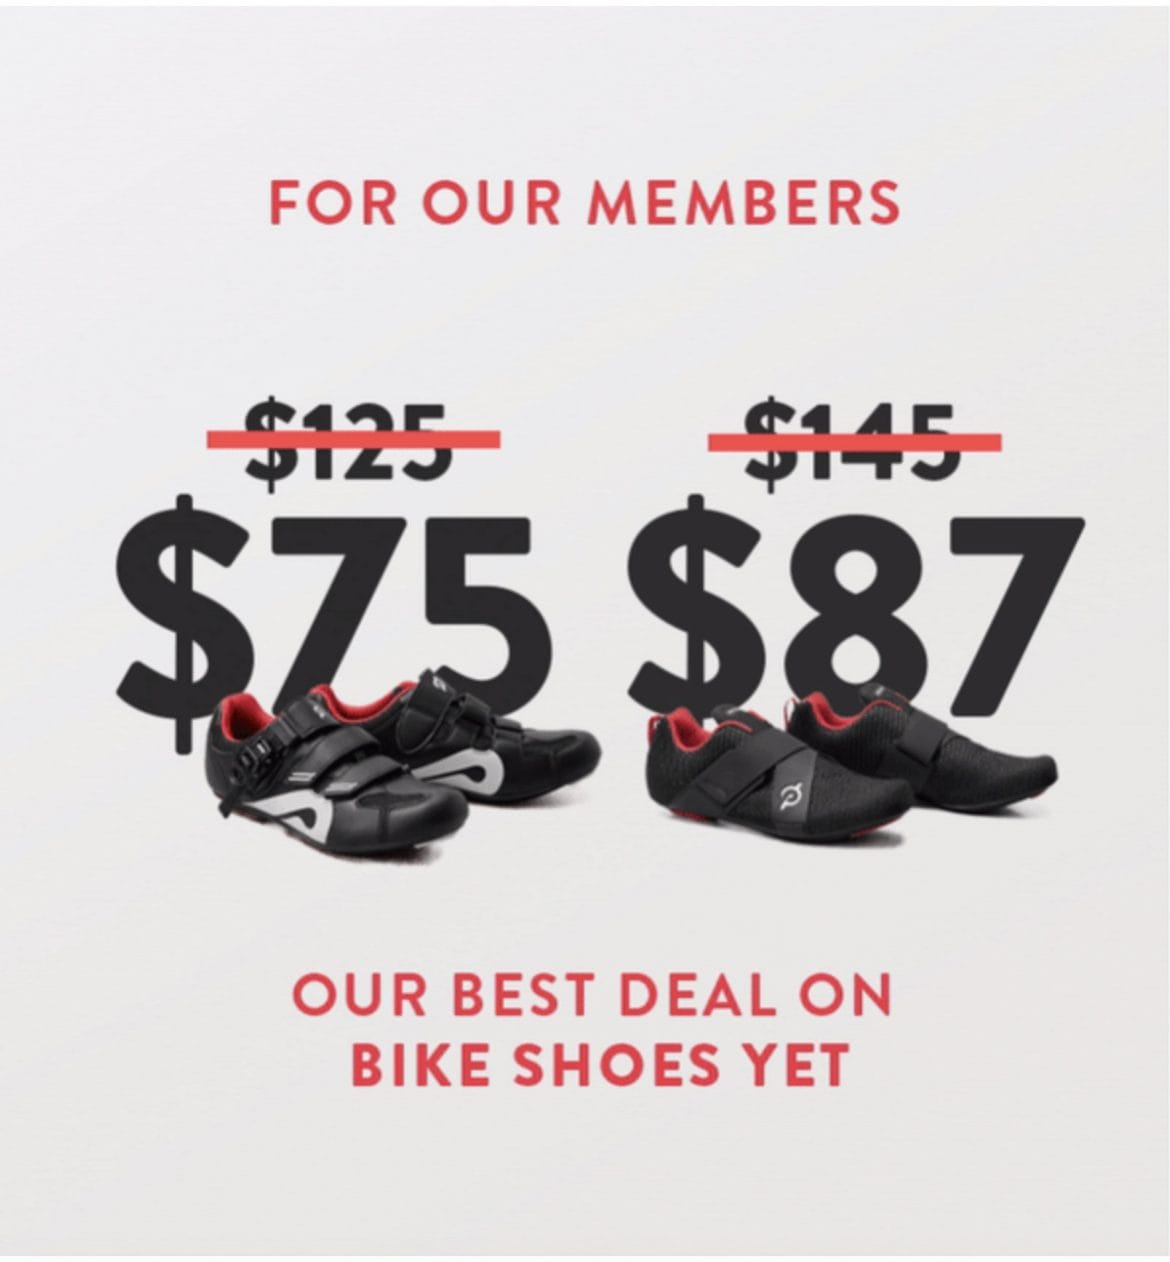 Peloton email to customers.